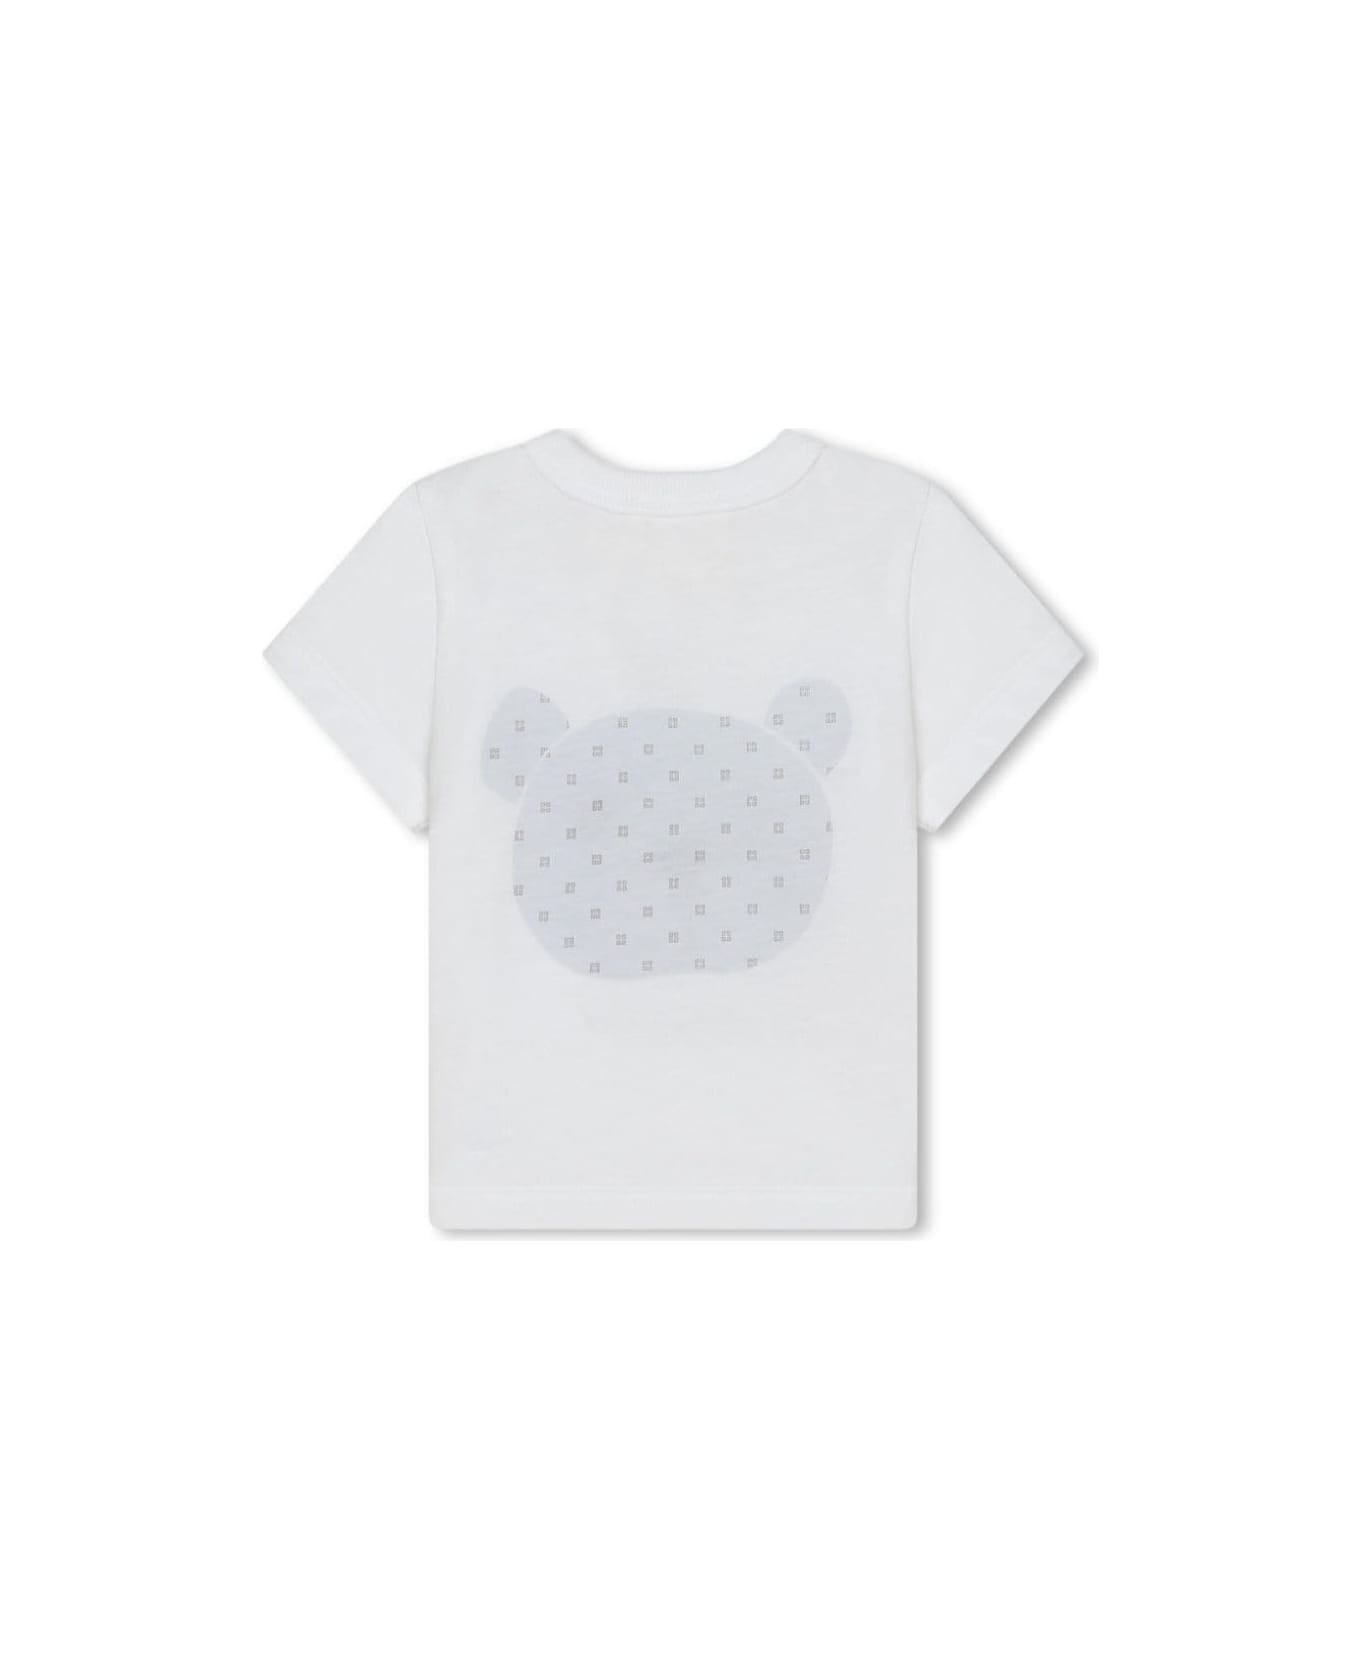 Givenchy White T-shirt, Shorts And Bandana Set With Teddy Bear Print In Cotton Baby - White